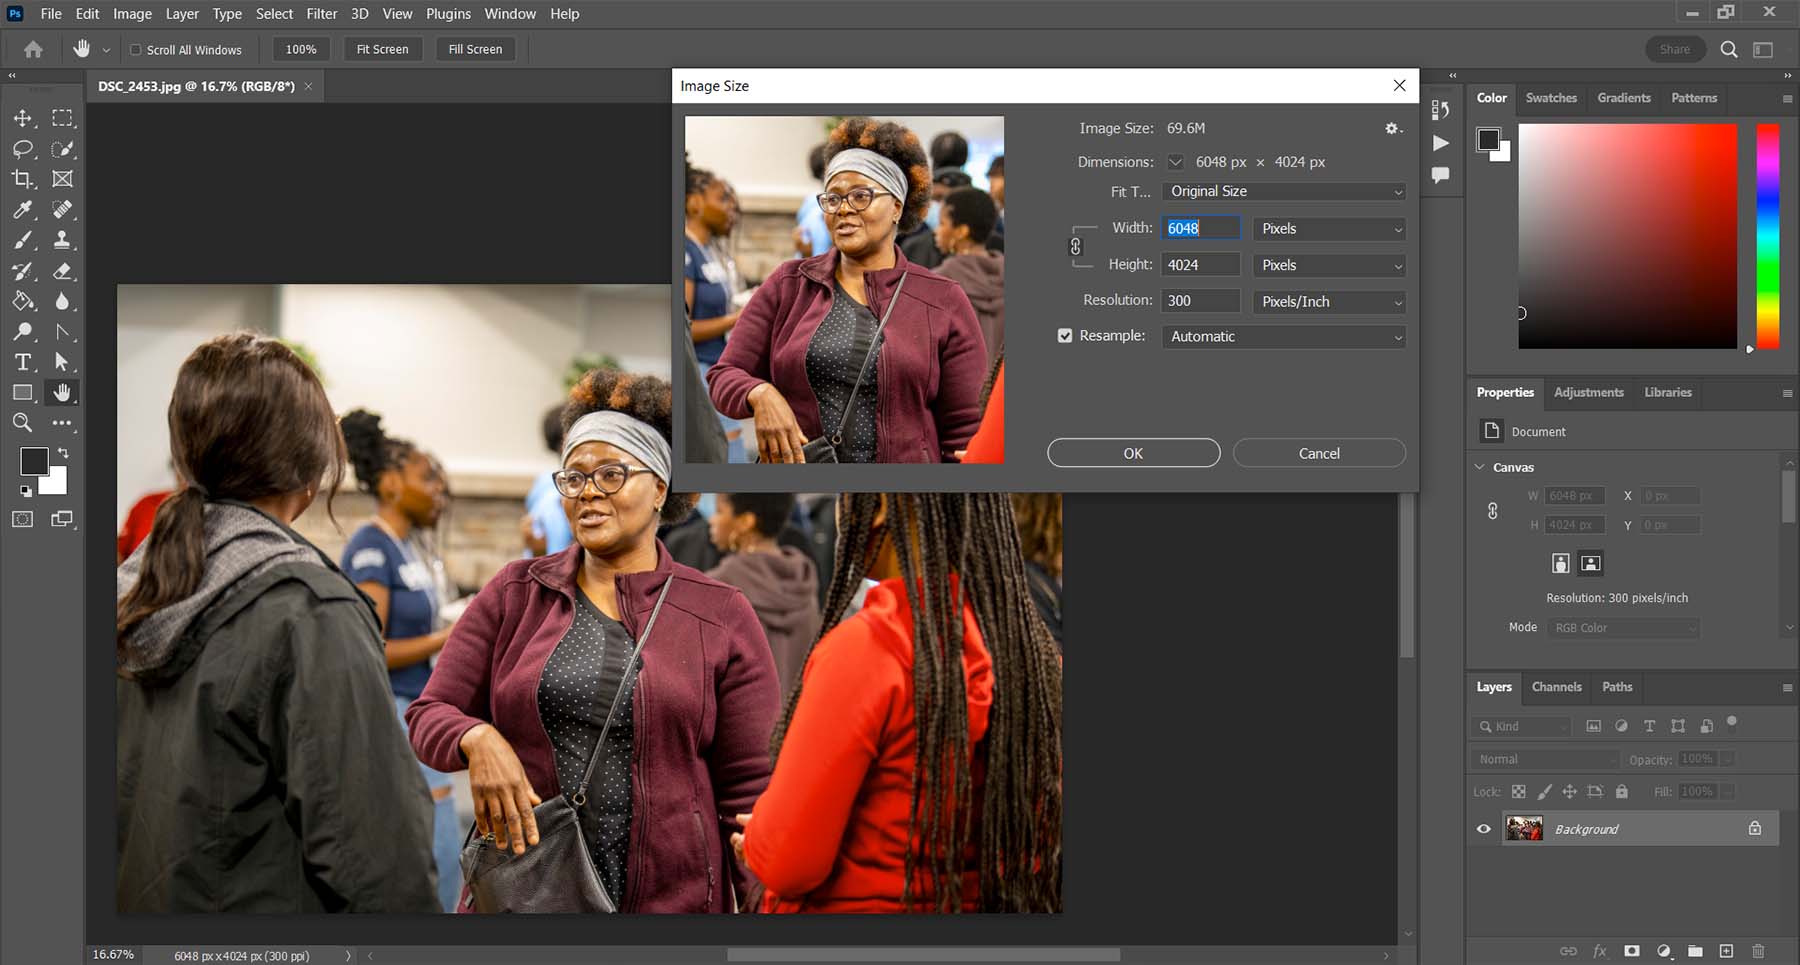 Adobe Firefly being used in Adobe Photoshop to upscale images